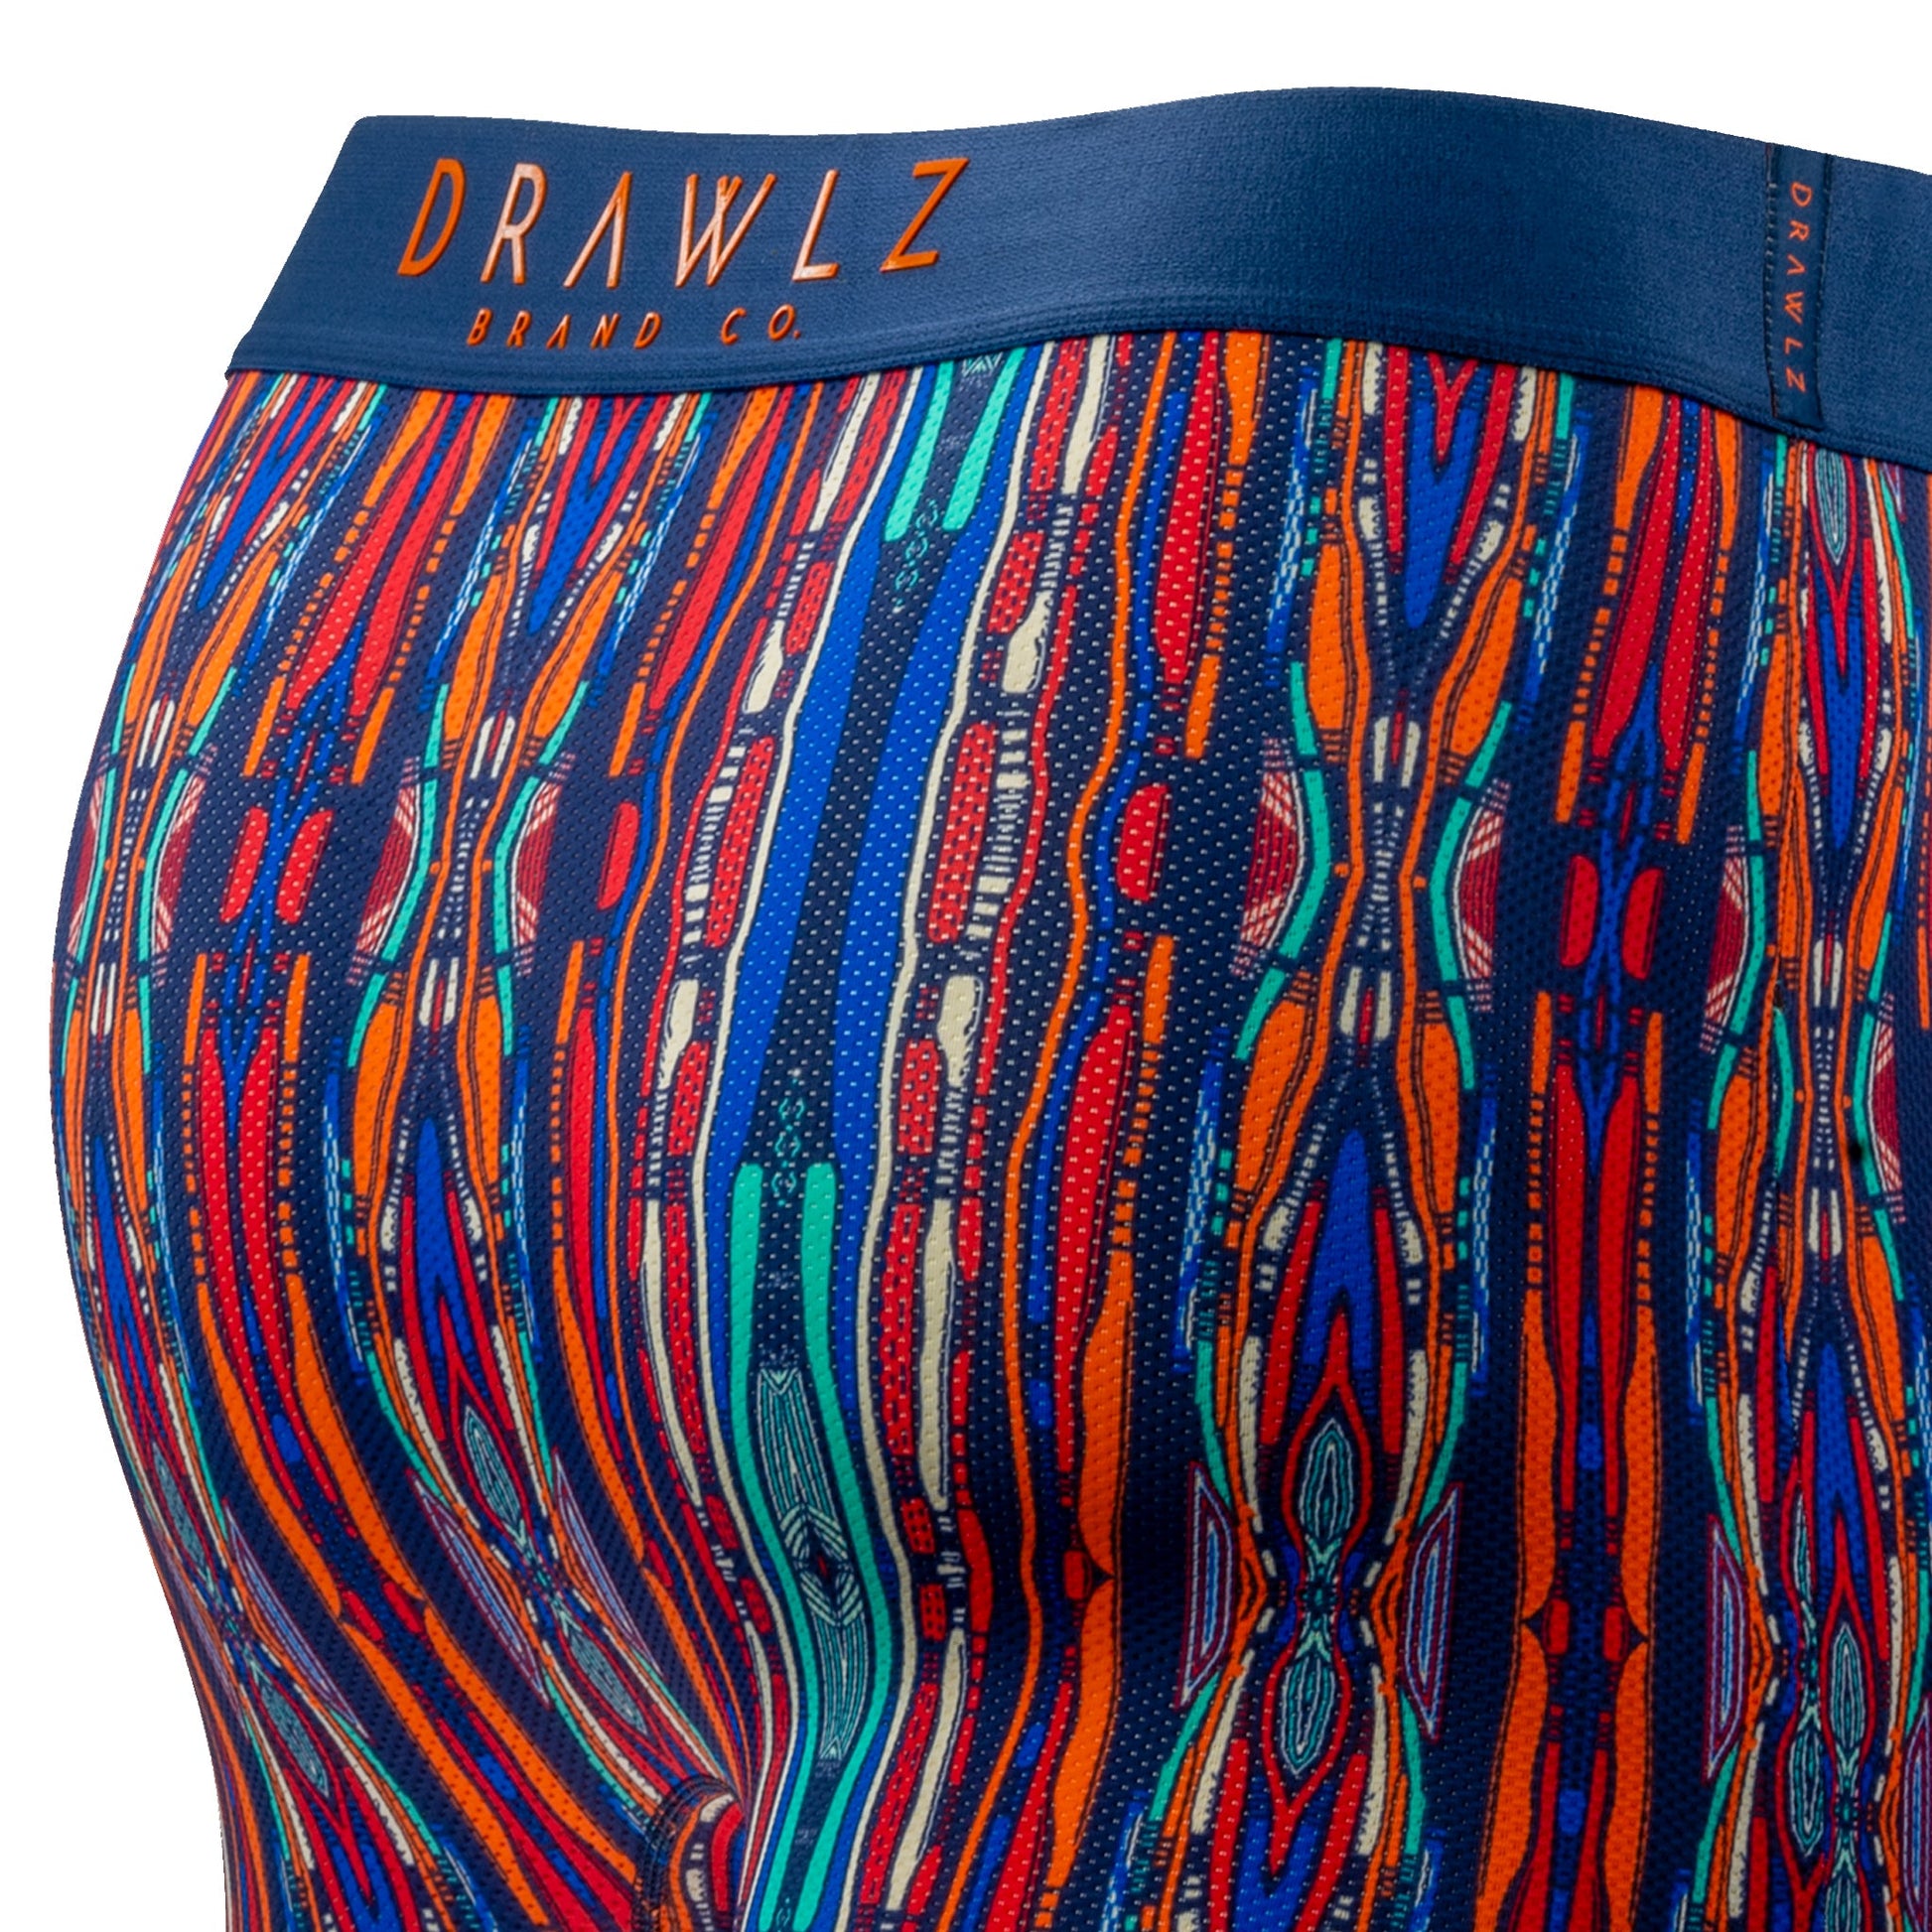 How to Get Stains Out of Underwear  A Men's Guide – Drawlz Brand Co.